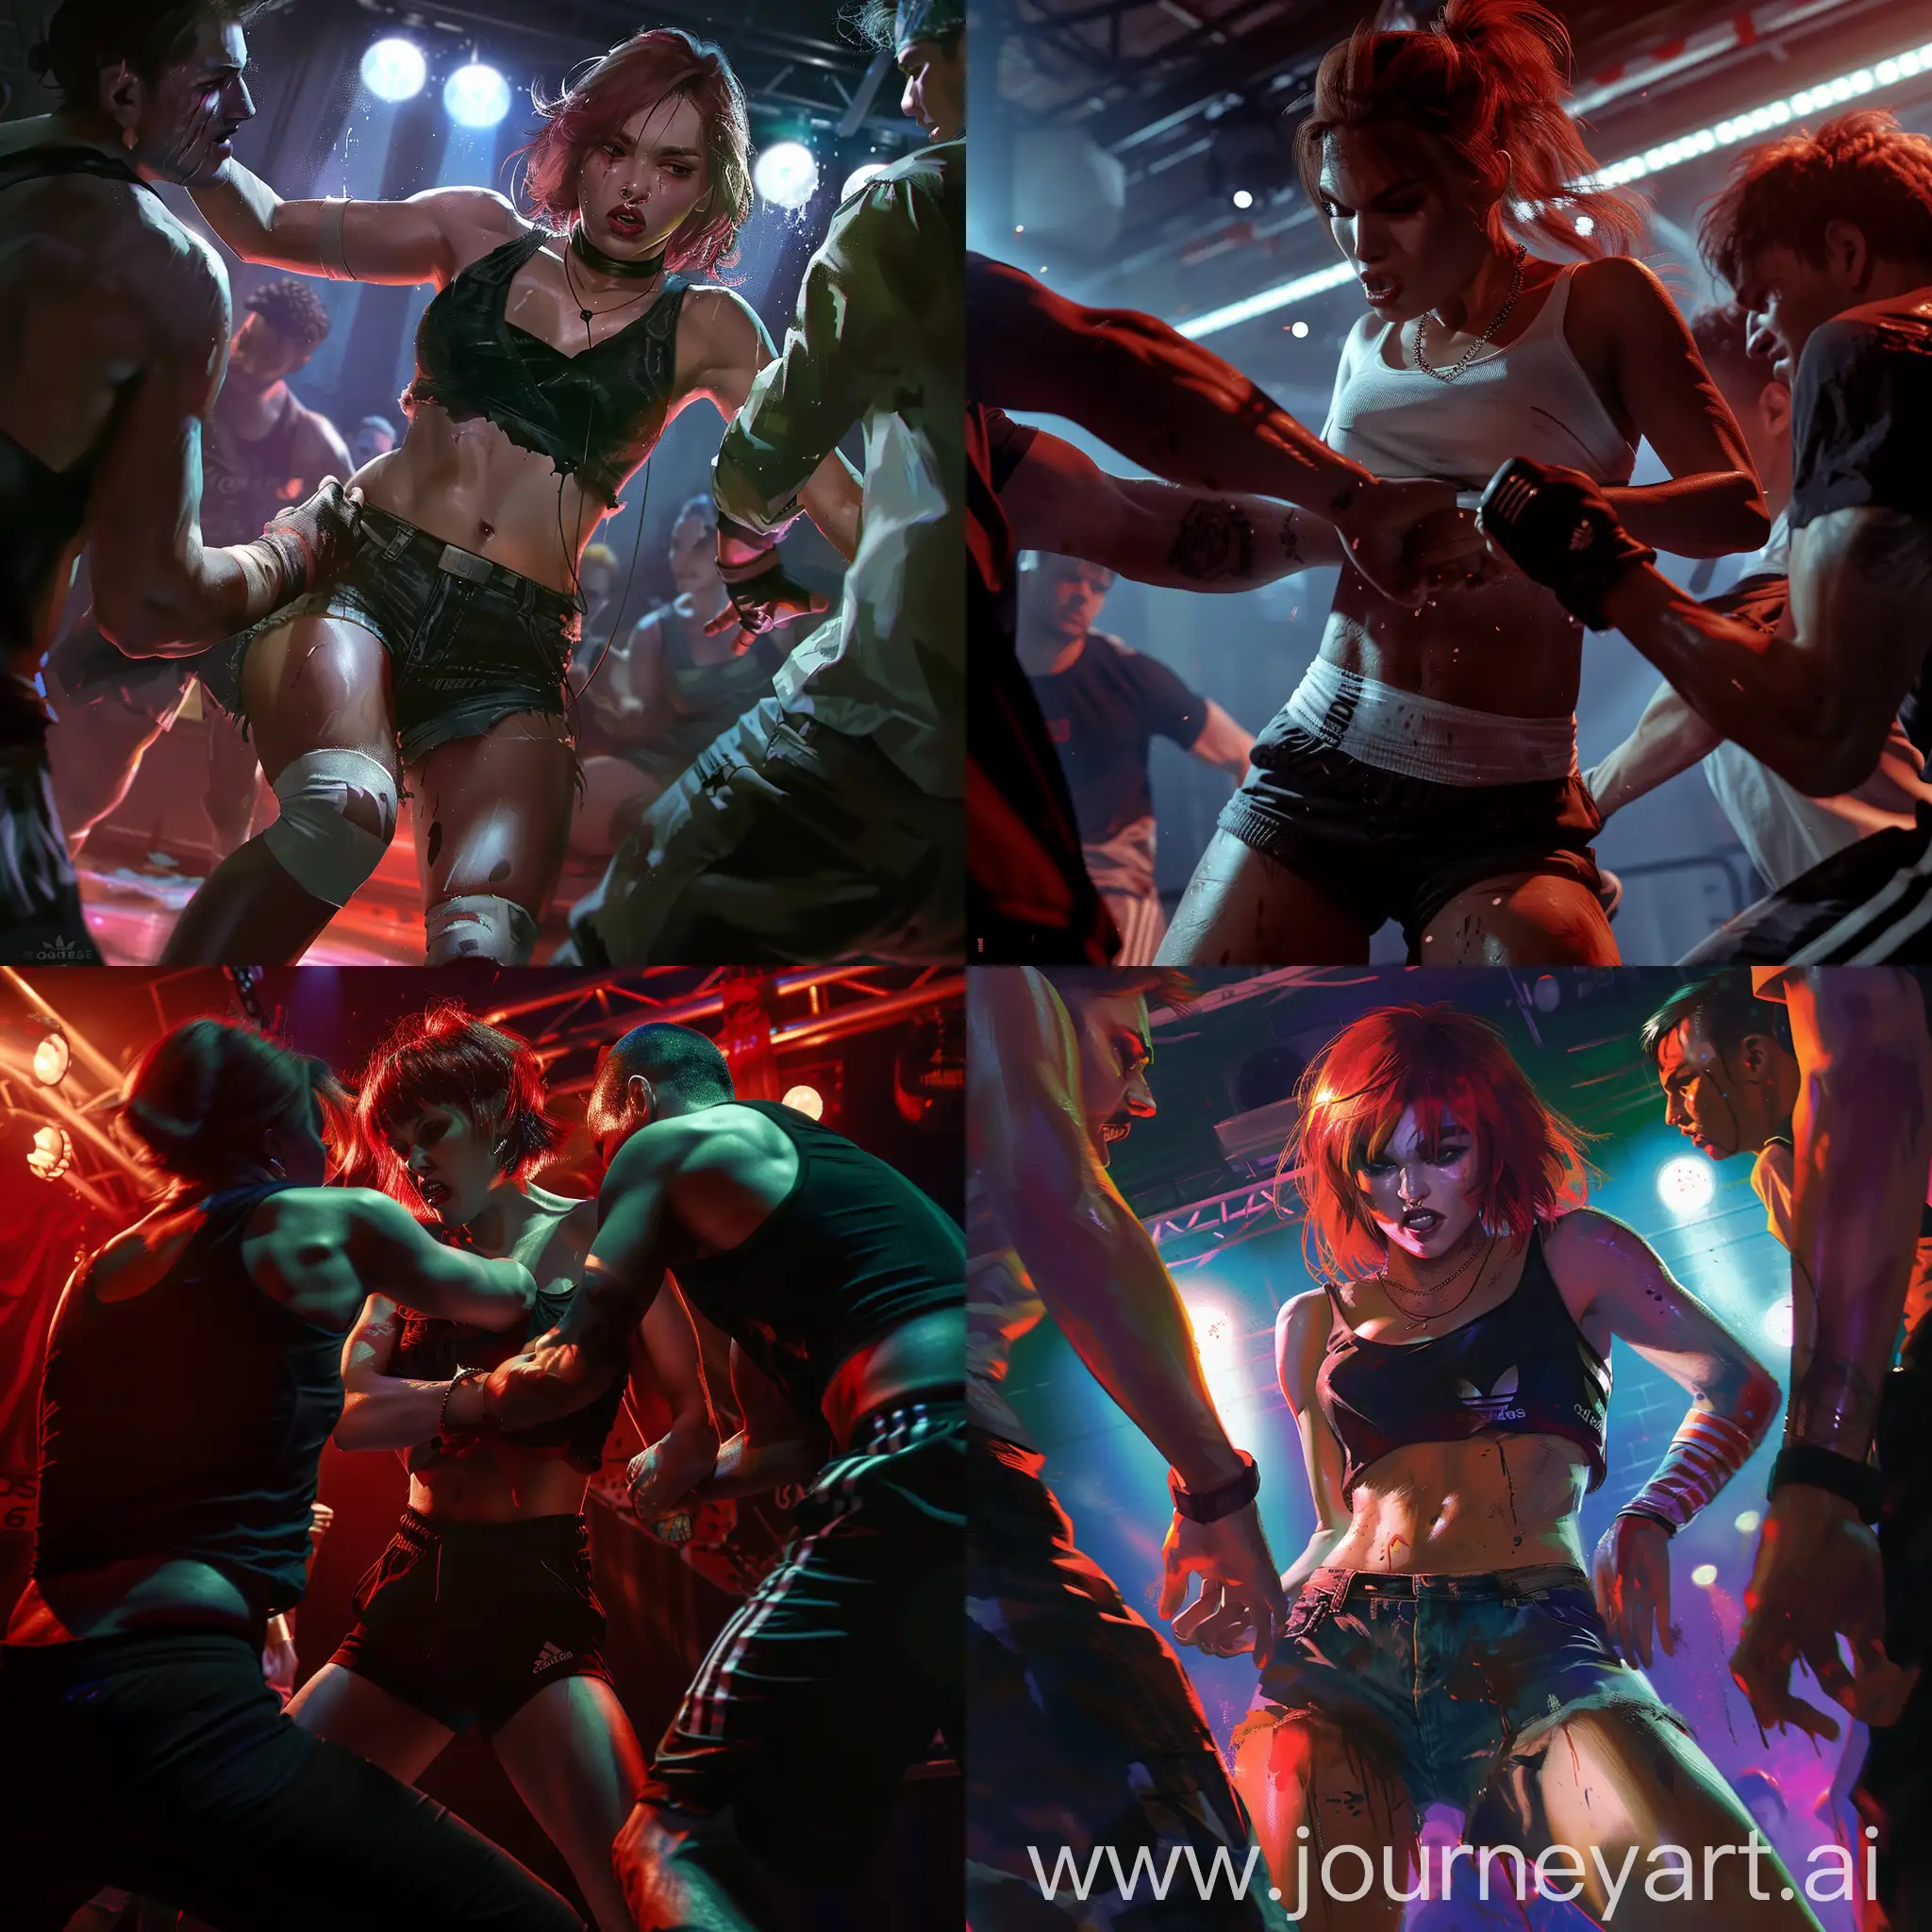 Night club. A 19 y.o. very muscular female bouncer with short red hair in (shorts and (adidas  white overknee socks)))  attacked by two male in sport clothing and sport pants. She is struggling and trying to defend herself but is clearly outmatched. Realistic style, dramatic lighting, intense action scene.